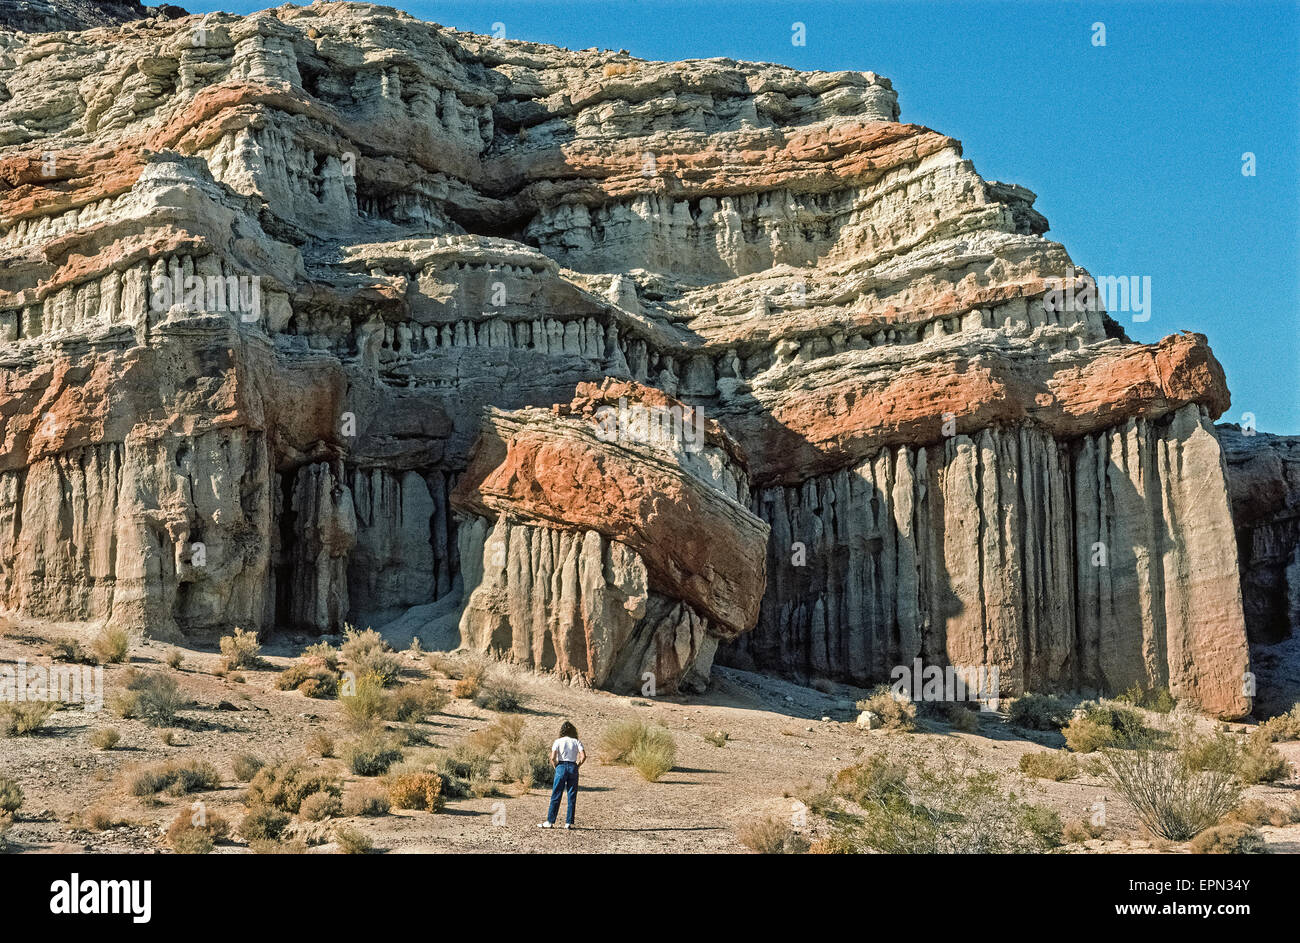 Spectacular cliffs and buttes with rock formations of dramatic shapes and vivid colors dwarfs a visitor at Red Rock Canyon State Park in the Mojave Desert at the southernmost edge of the Sierra Nevada mountain range in Kern County, California, USA. The unusual geologic shapes of this natural attraction were created by wind and rain eroding softer rock layers beneath harder layers of the colored caprocks. Red Rock Canyon has been the filming location of many movies, videos and commercials. Guided nature hikes and campfire programs are offered during the spring and fall months. Stock Photo